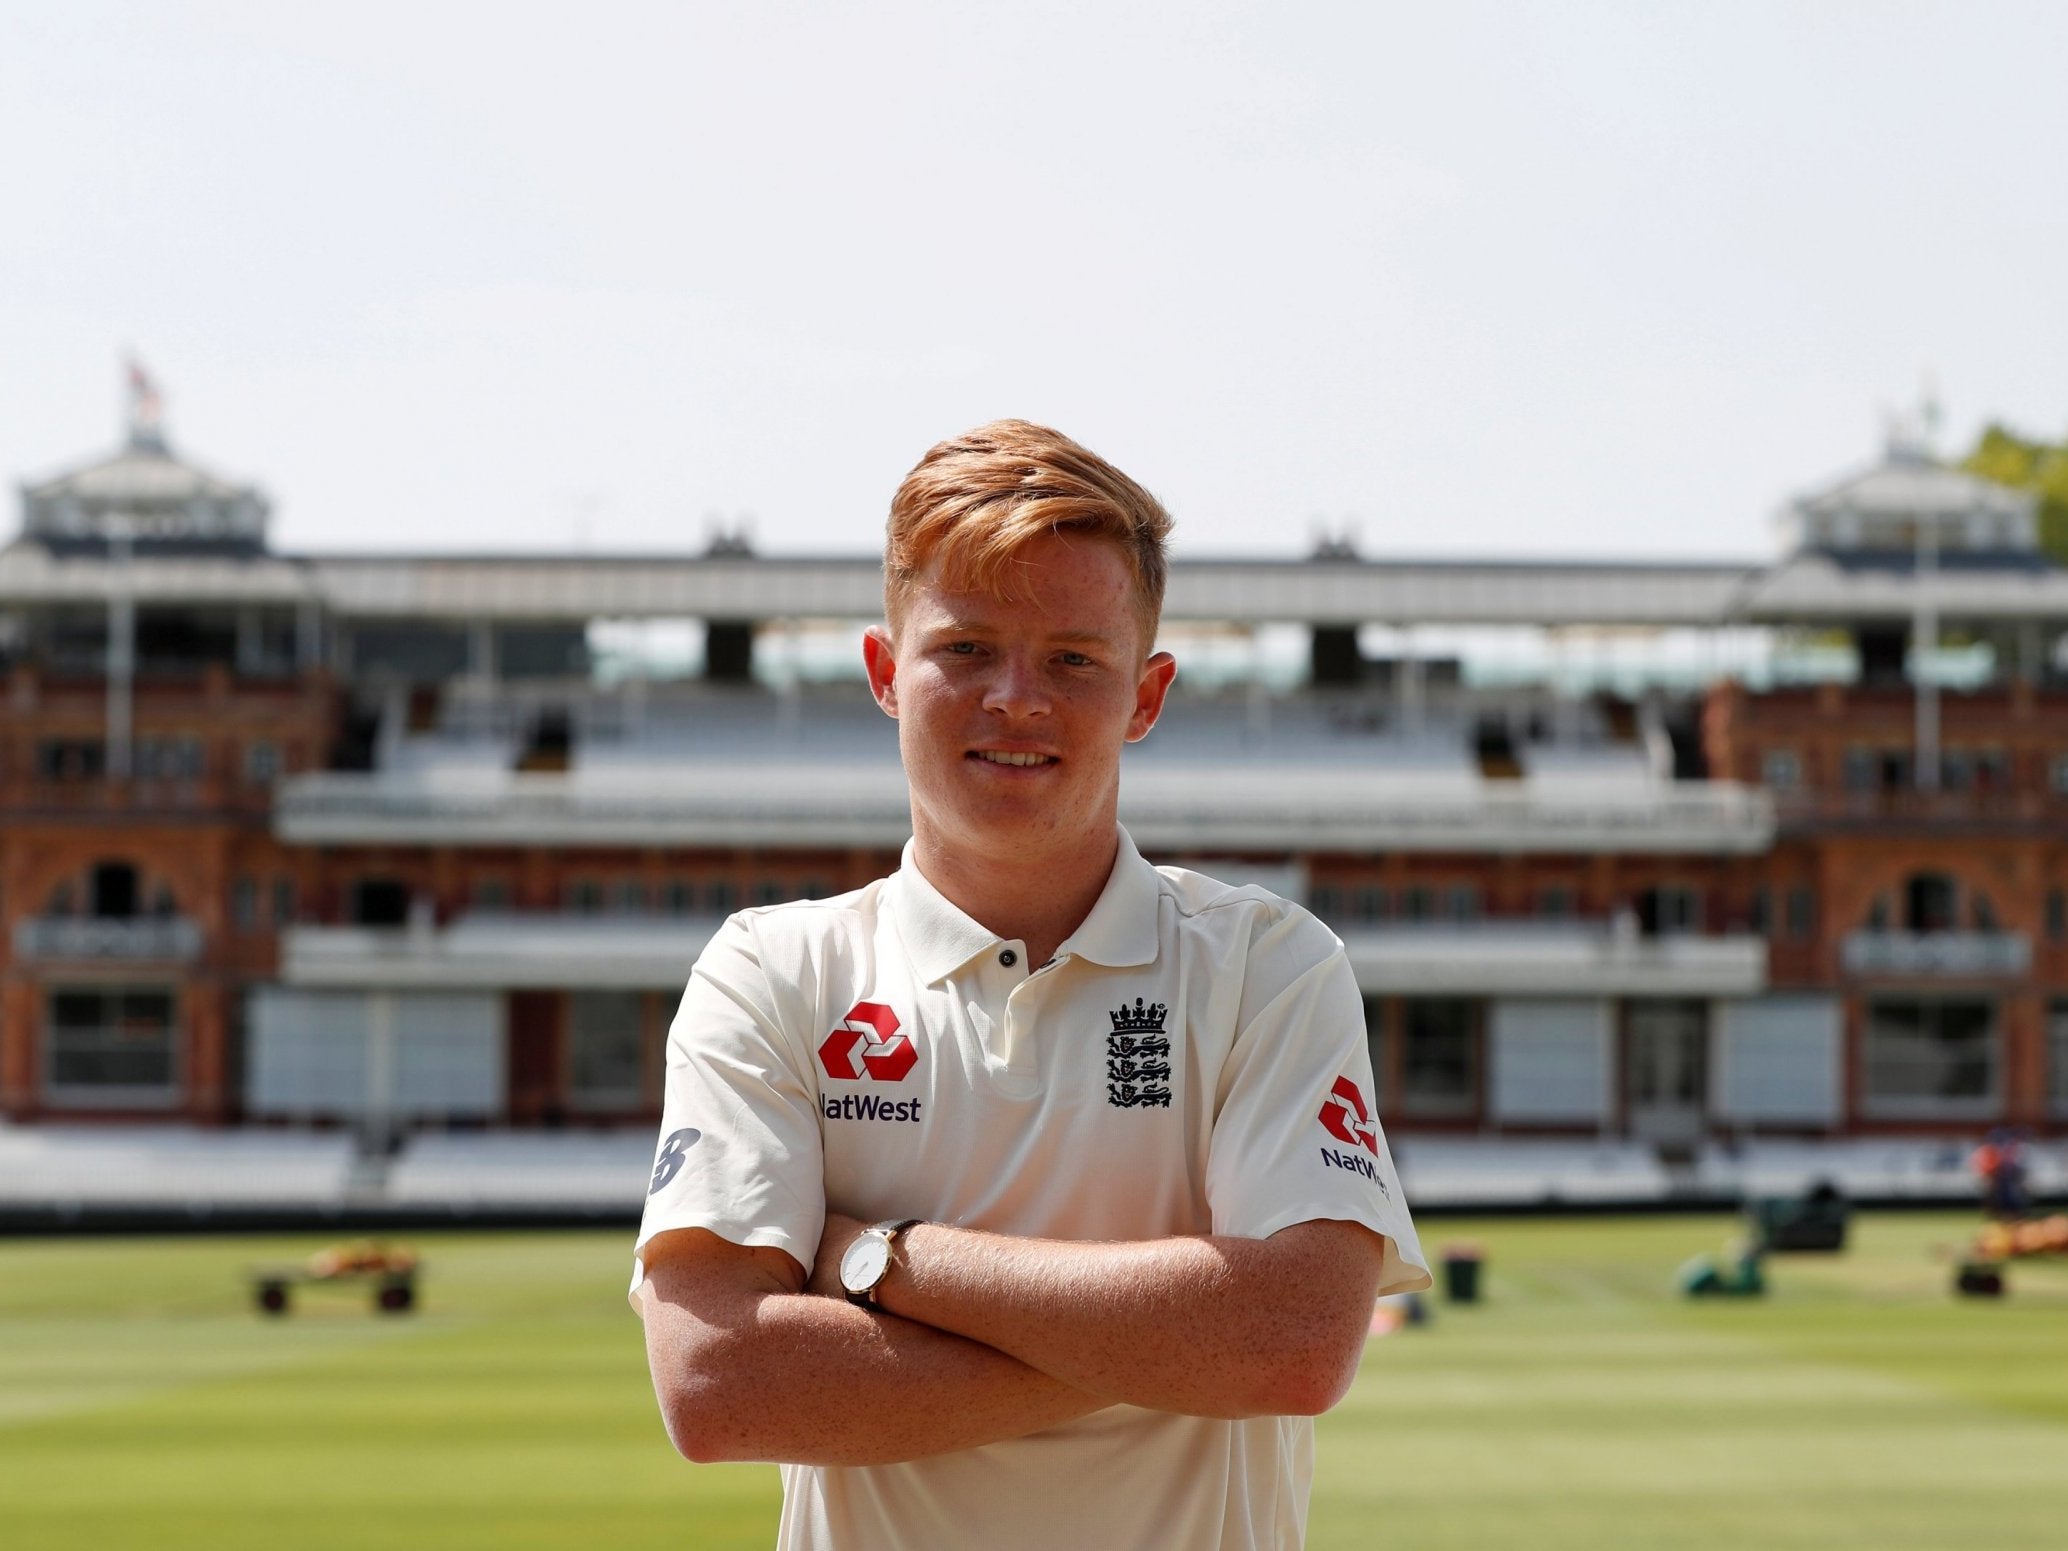 Surrey’s Ollie Pope could earn a recall for England’s tour of New Zealand